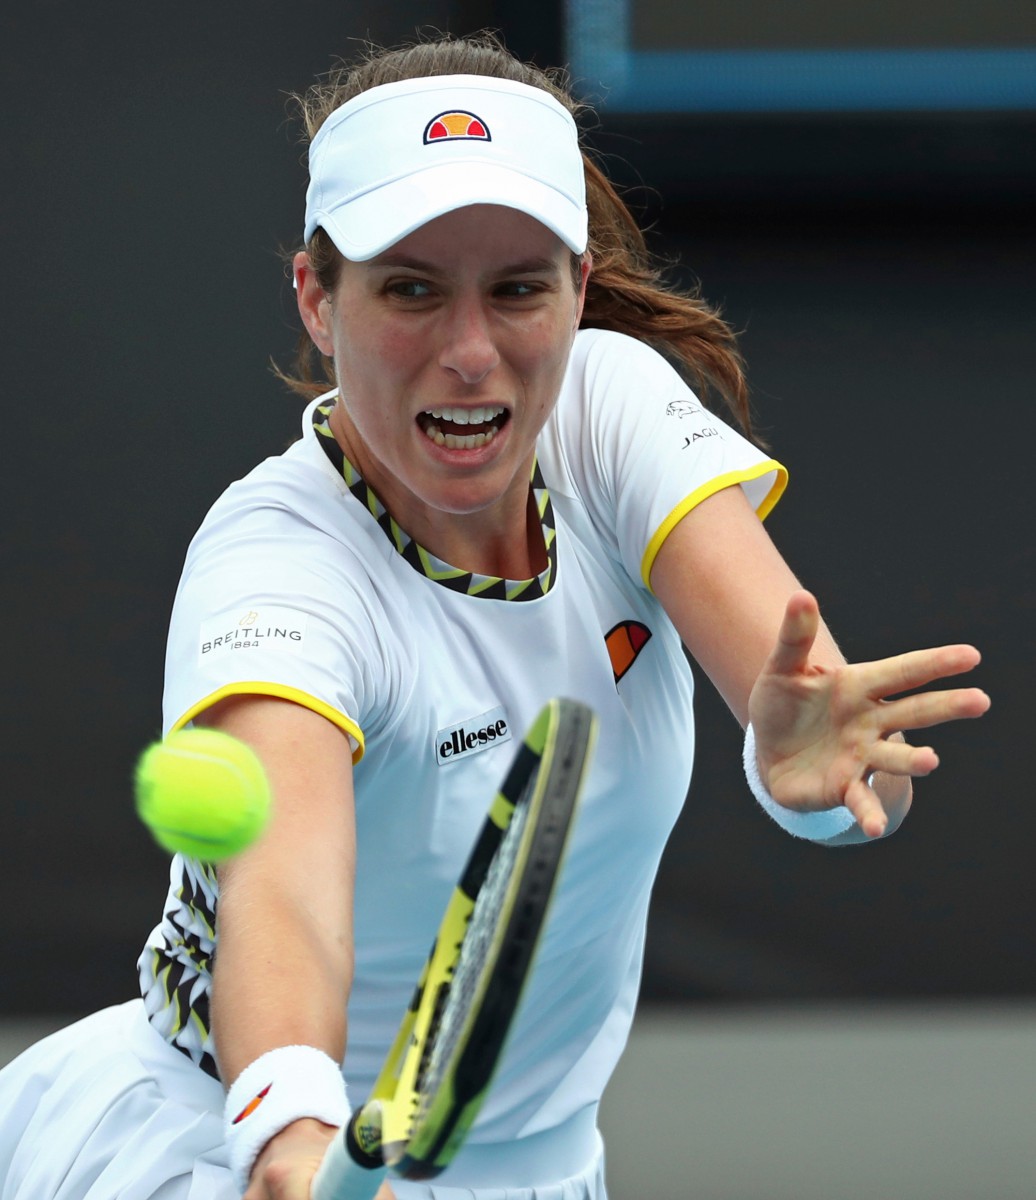 , British No.1 Jo Konta crashes out of the Australian Open in Melbourne